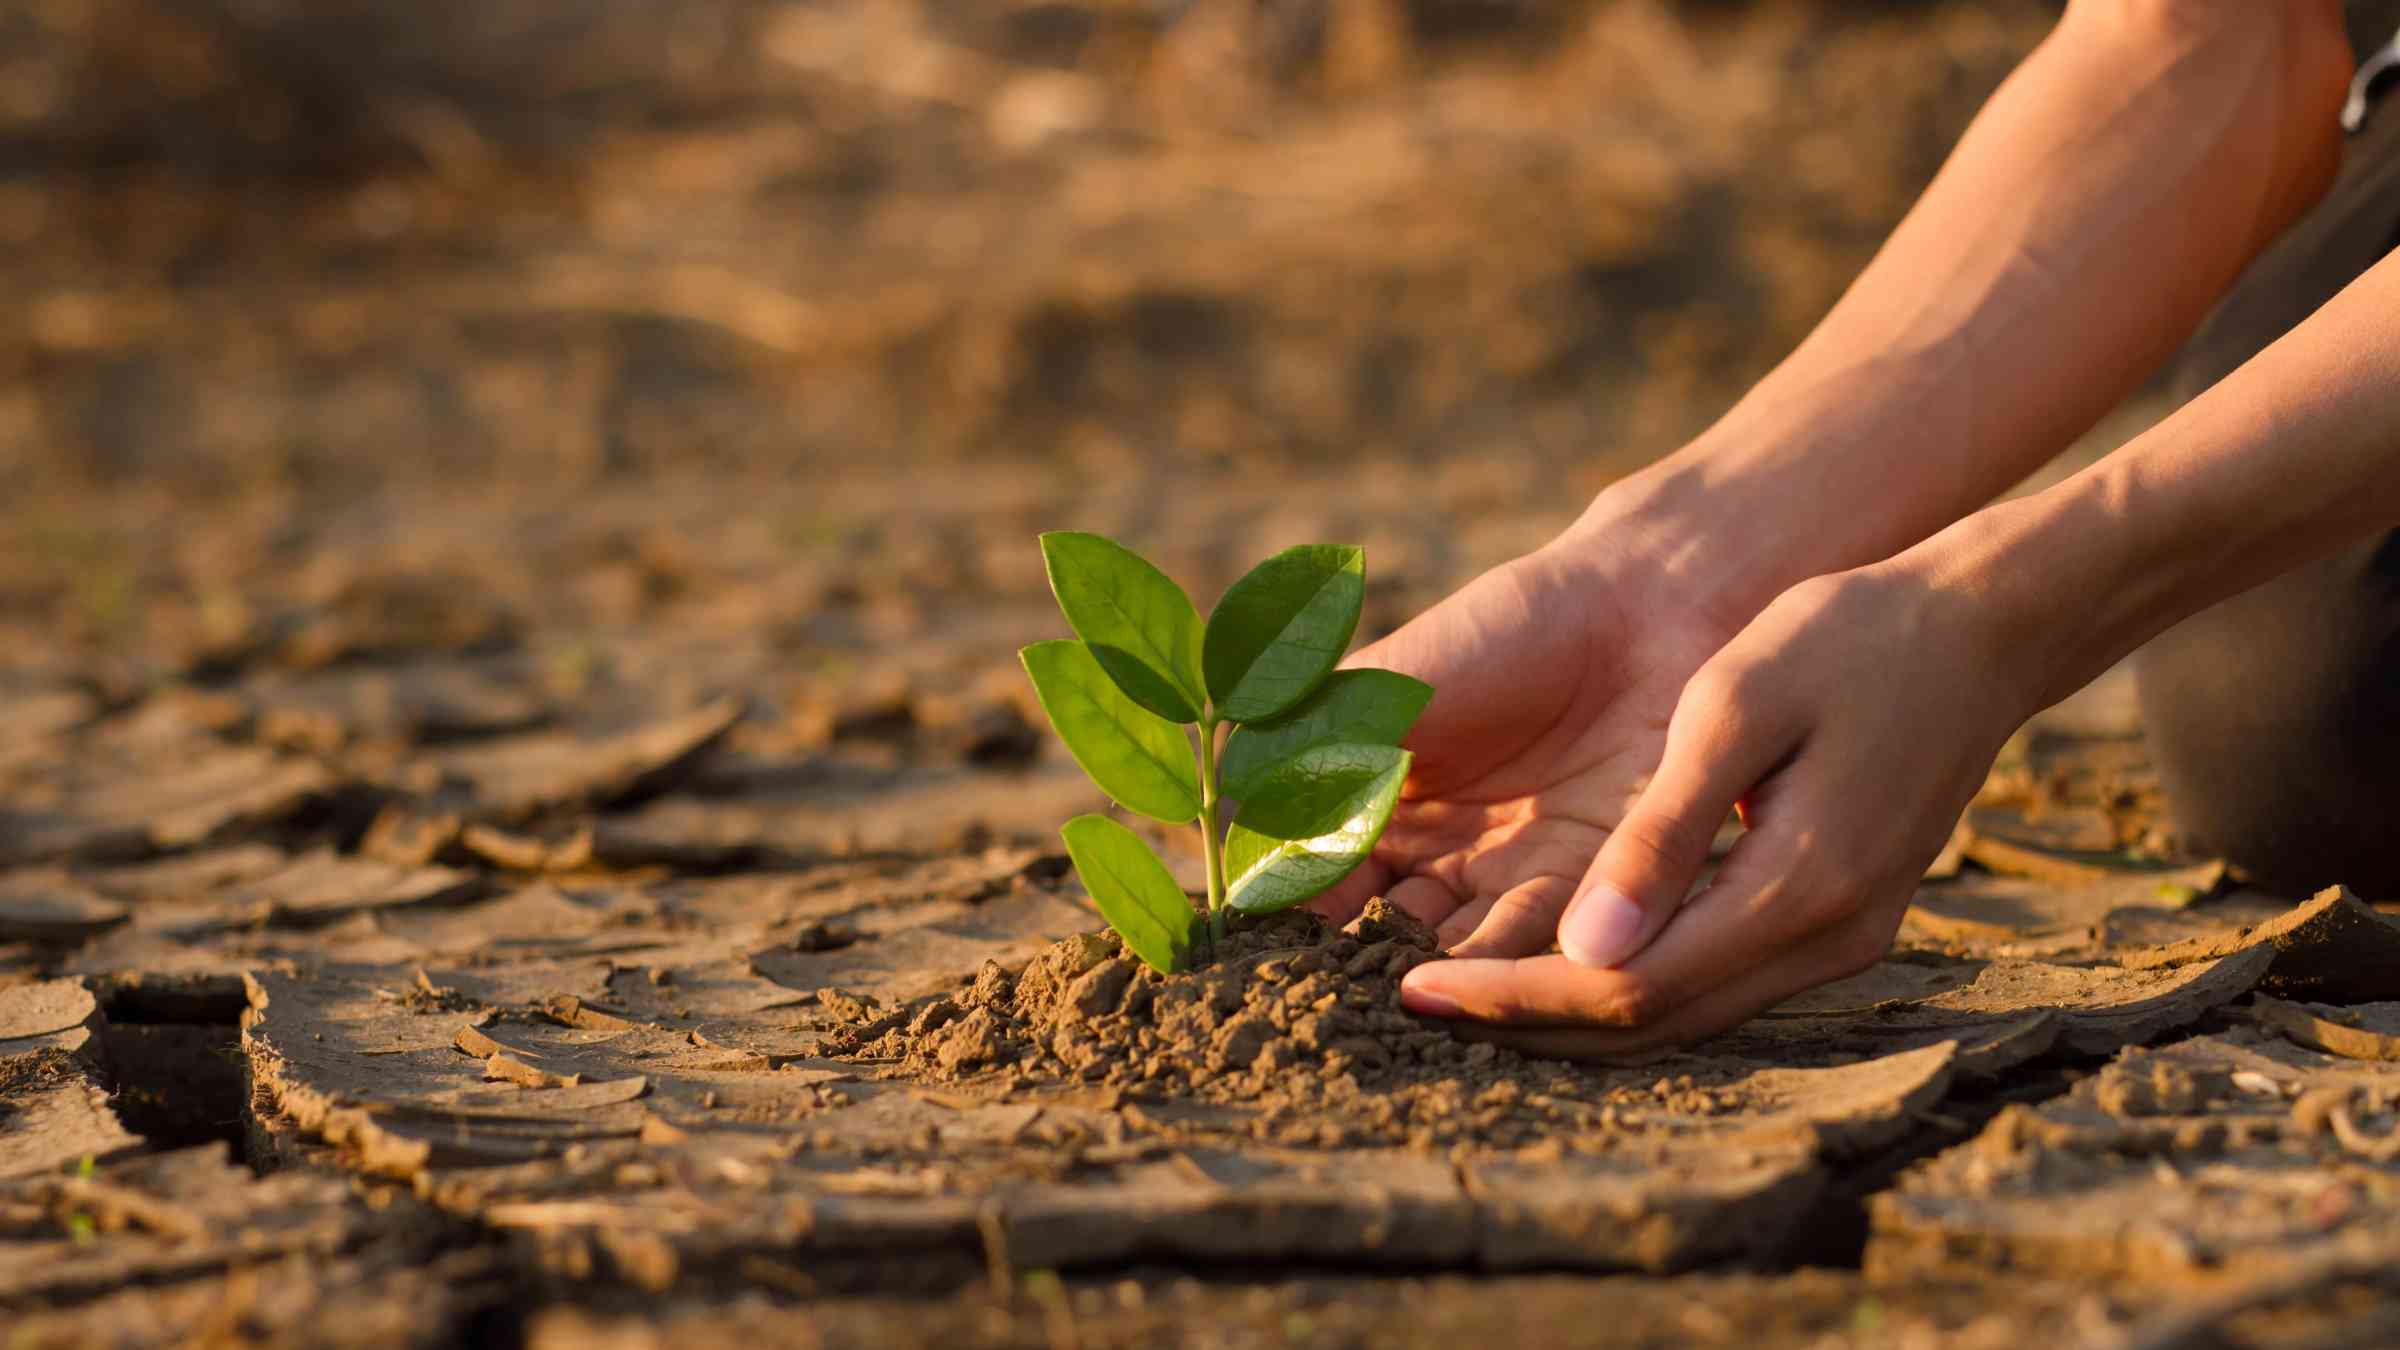 Hand of young children or teenager planting a tree on dry cracked land to recovery a nature to green again, Climate change crisis solution, Volunteer and Environment conservation concept